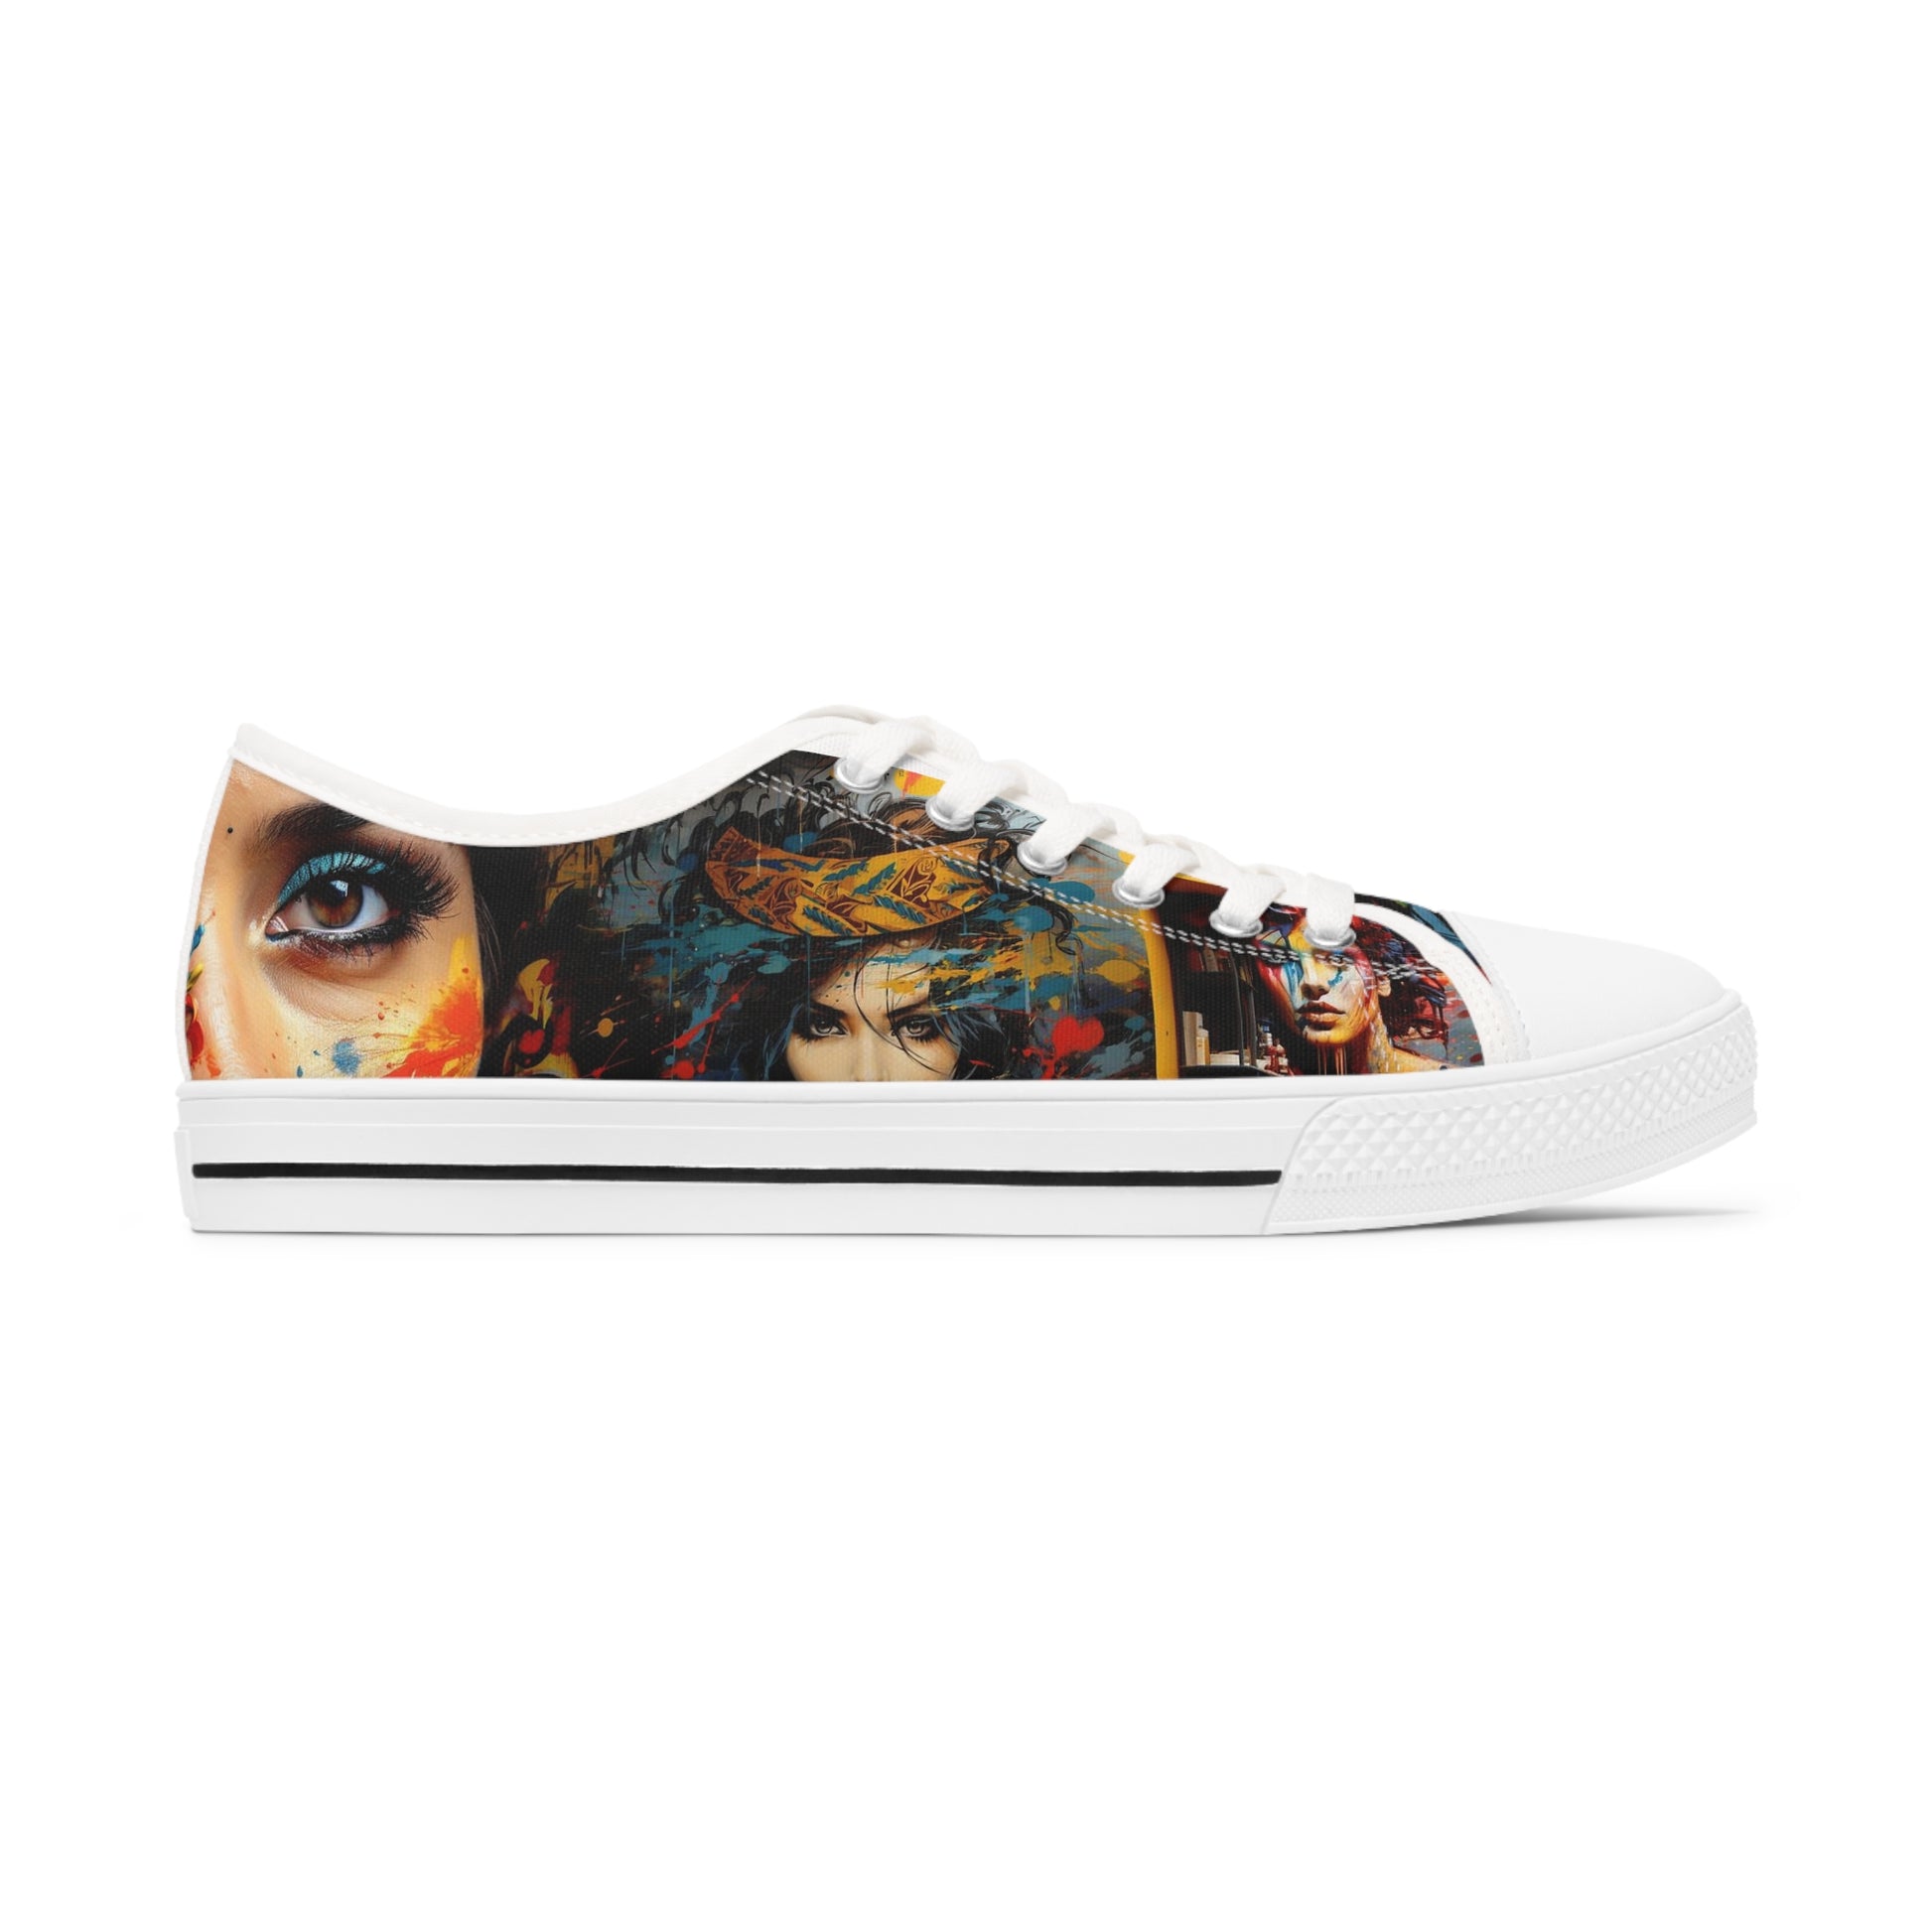 Stashbox Psychedelic Sneakers for Women